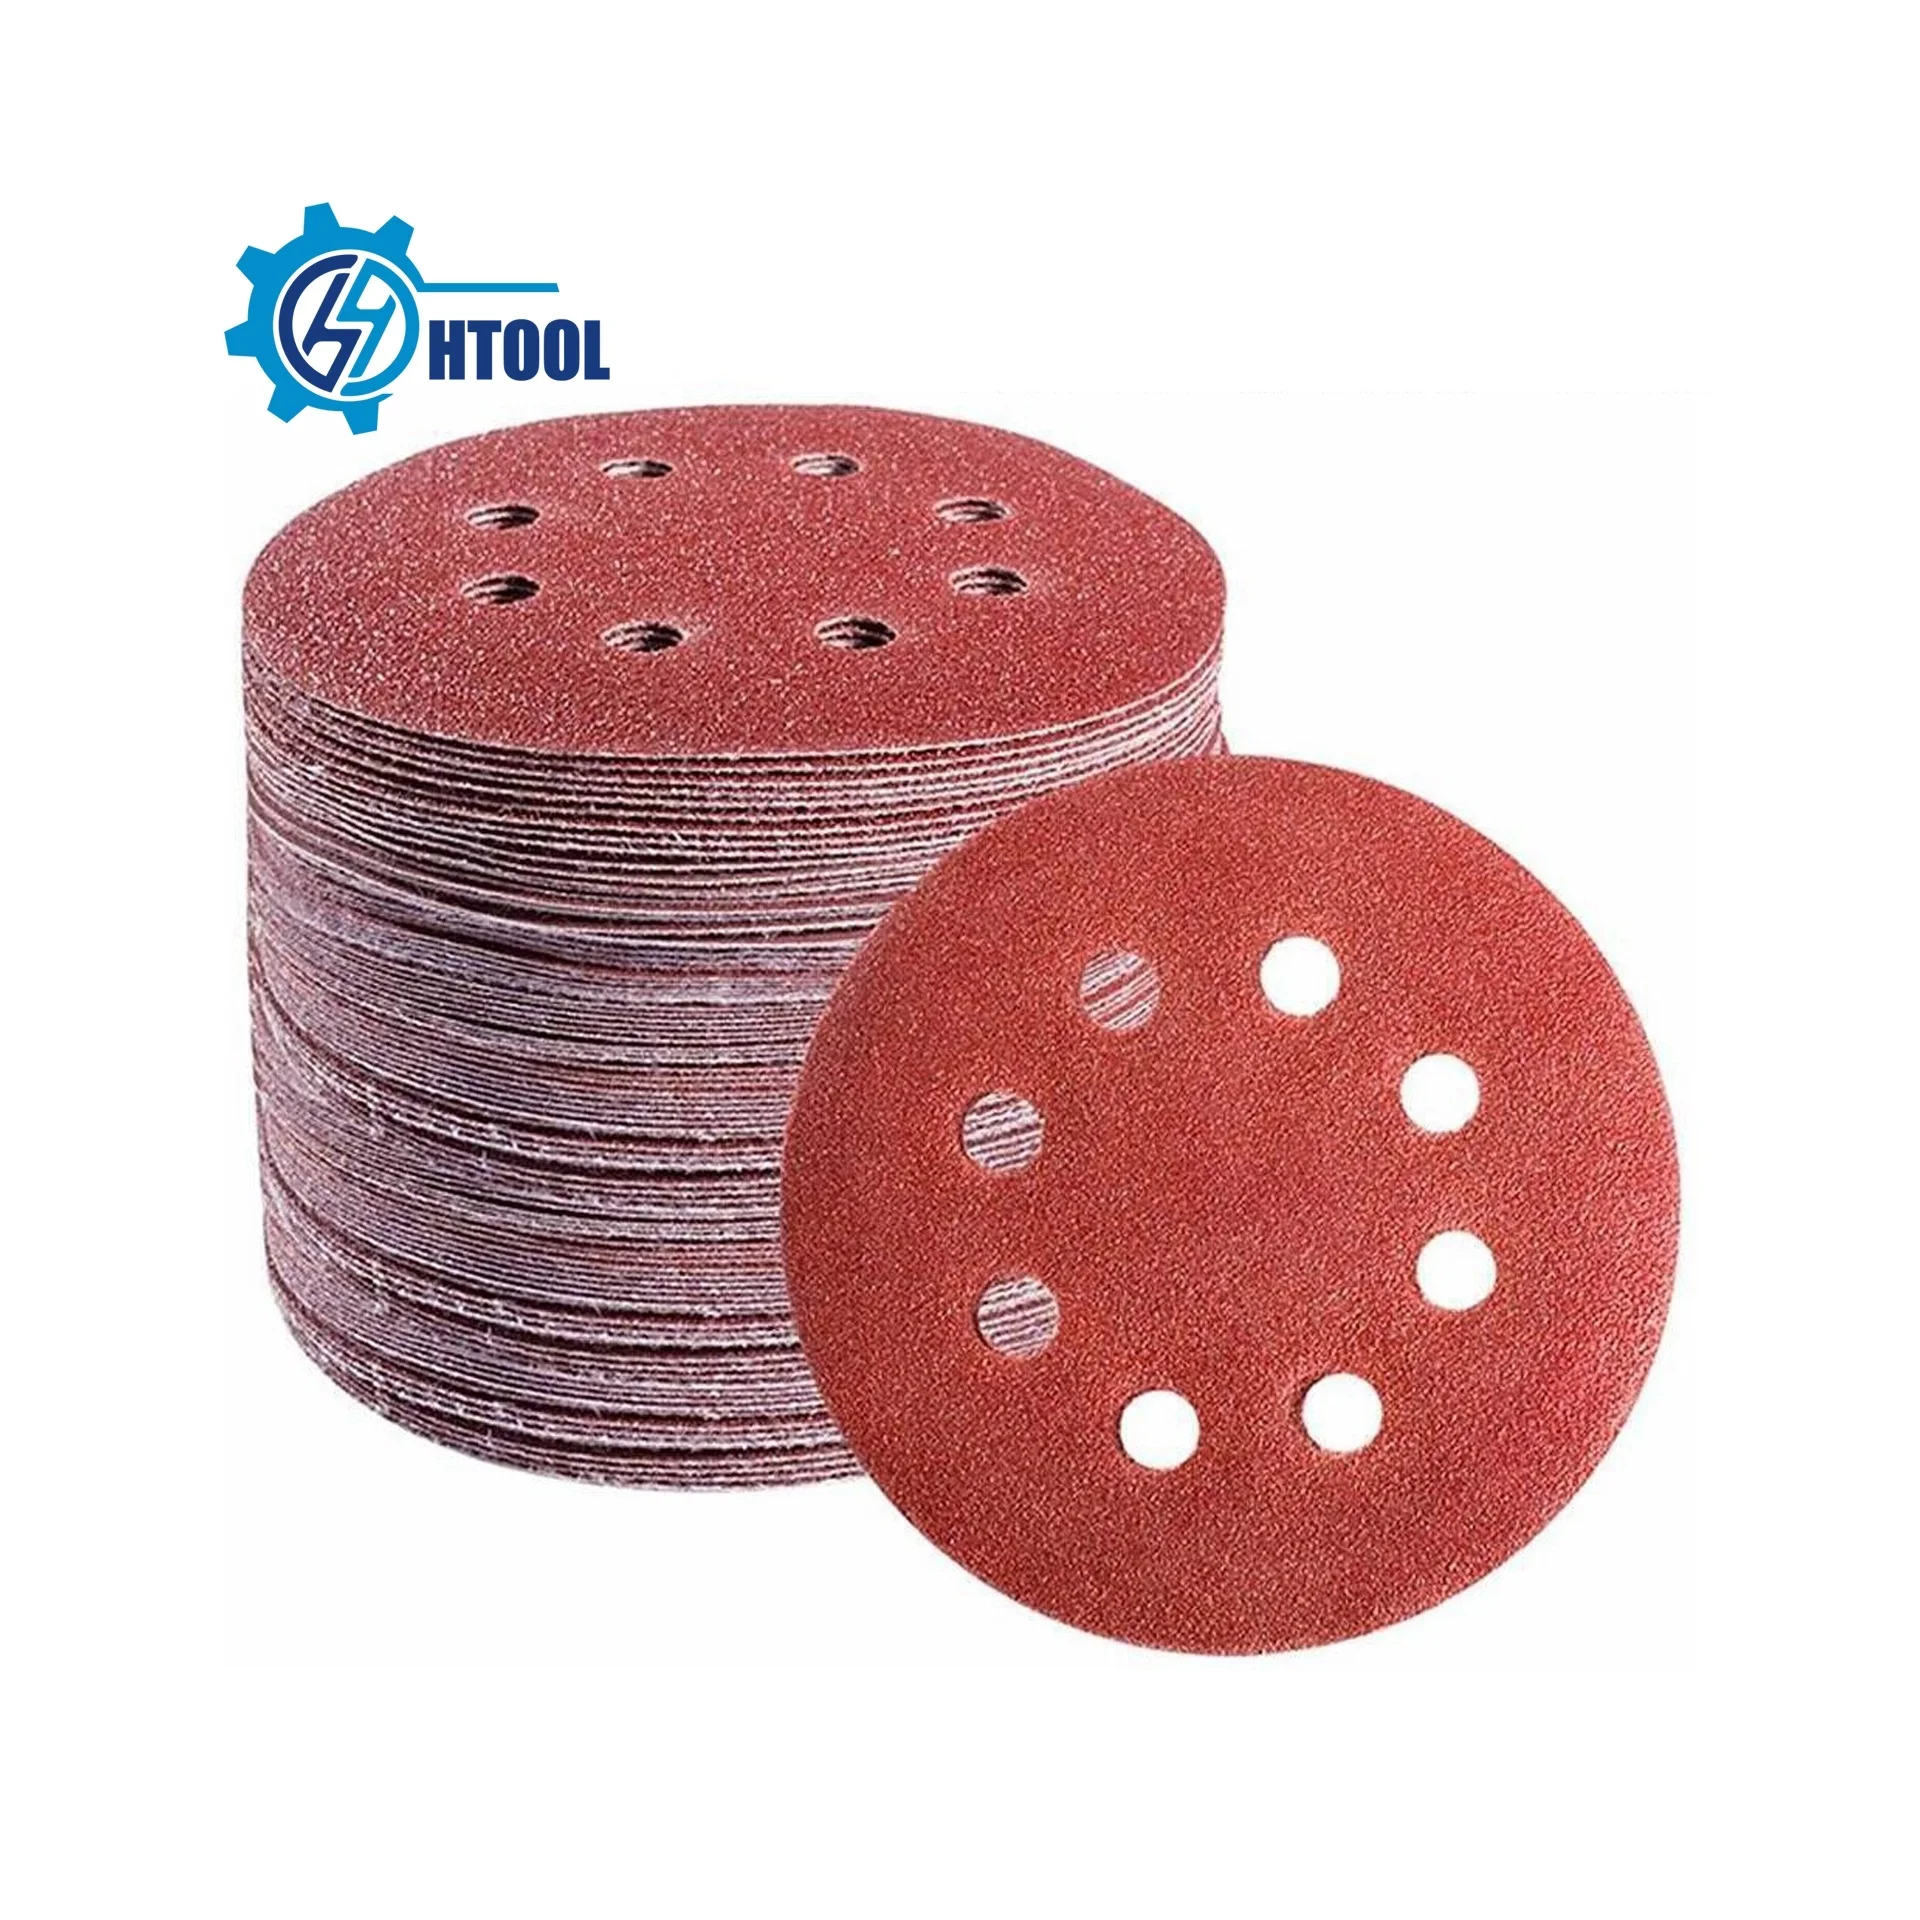 

High Efficient 5 Inch 8 Holes Abrasive Disc Aluminum Oxide Hook And Loop Sanding Disc for Wood Auto